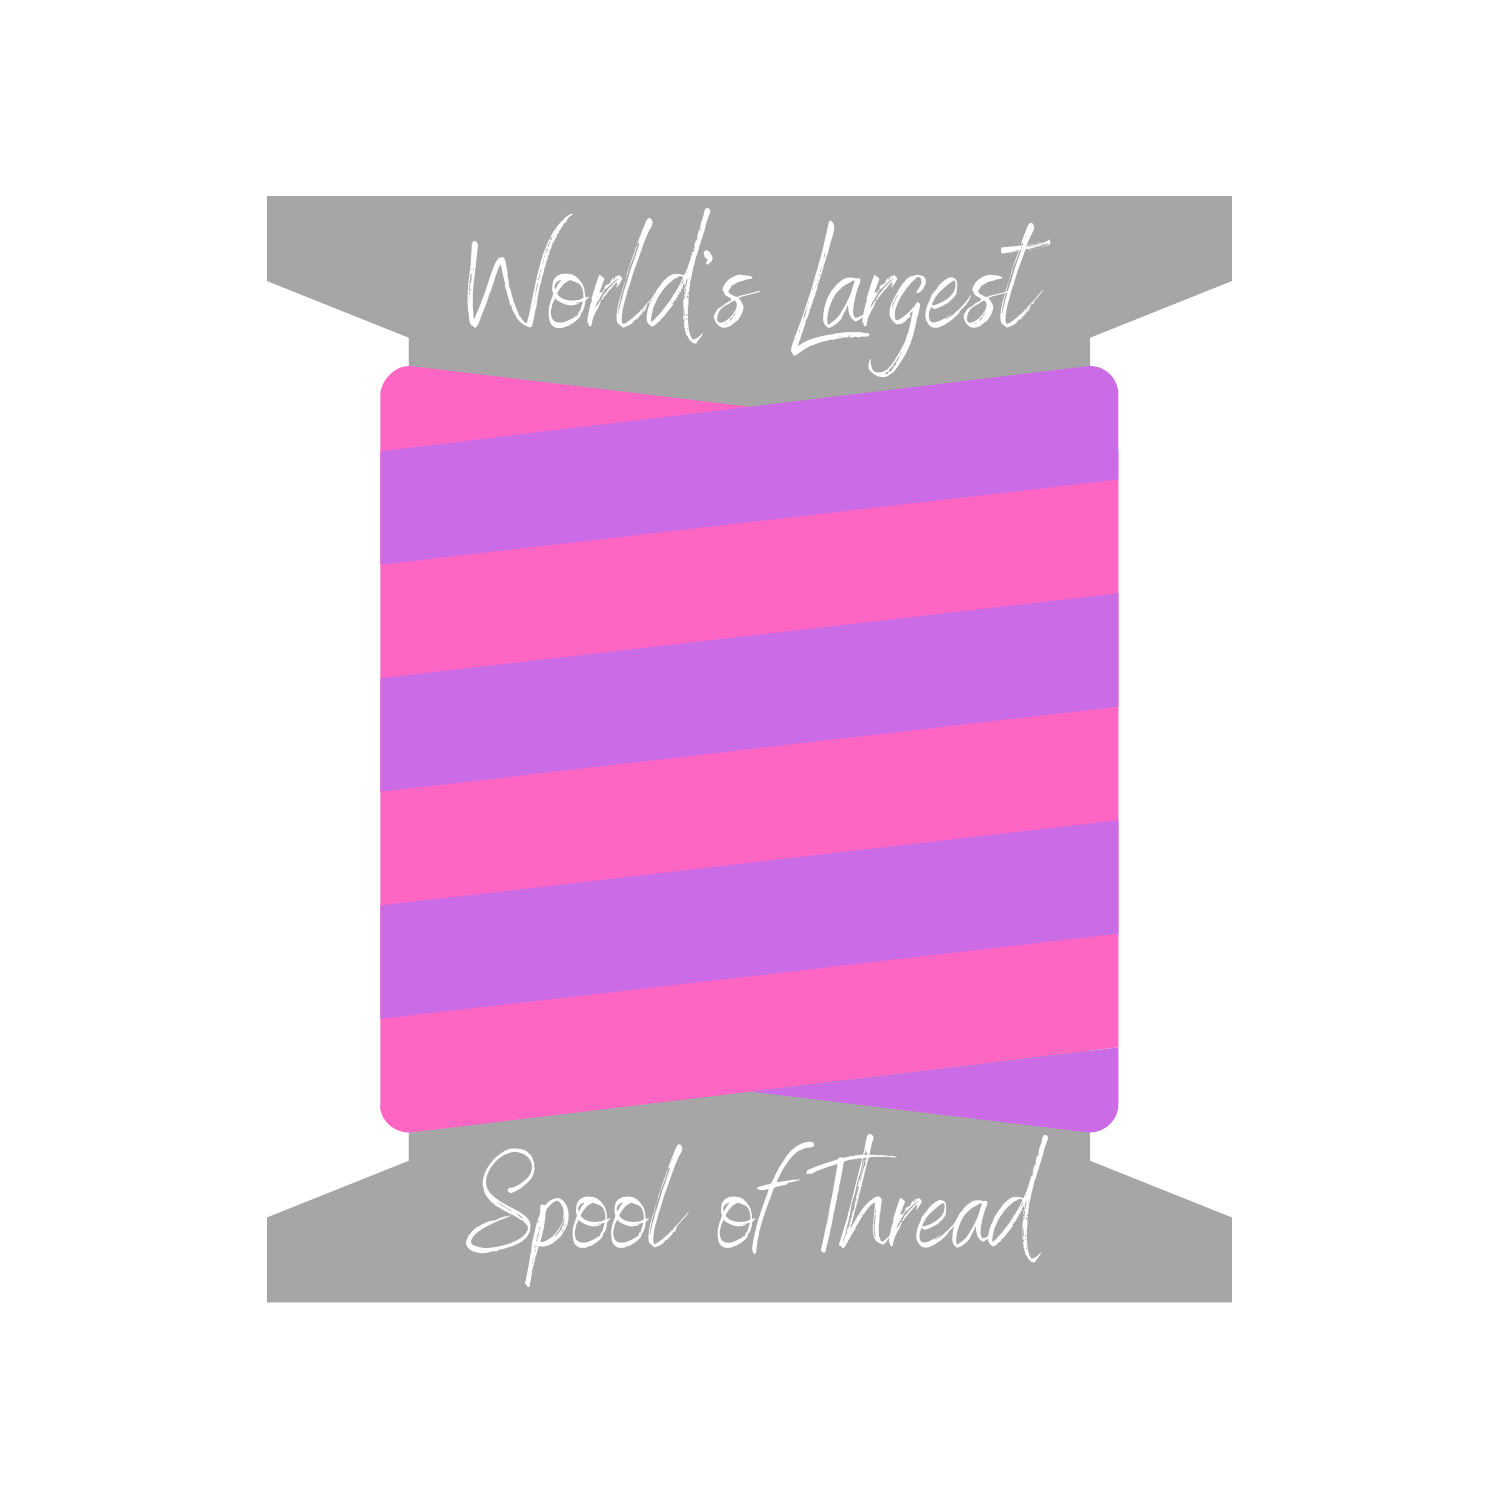 Magnet - World's Largest Spool of Thread